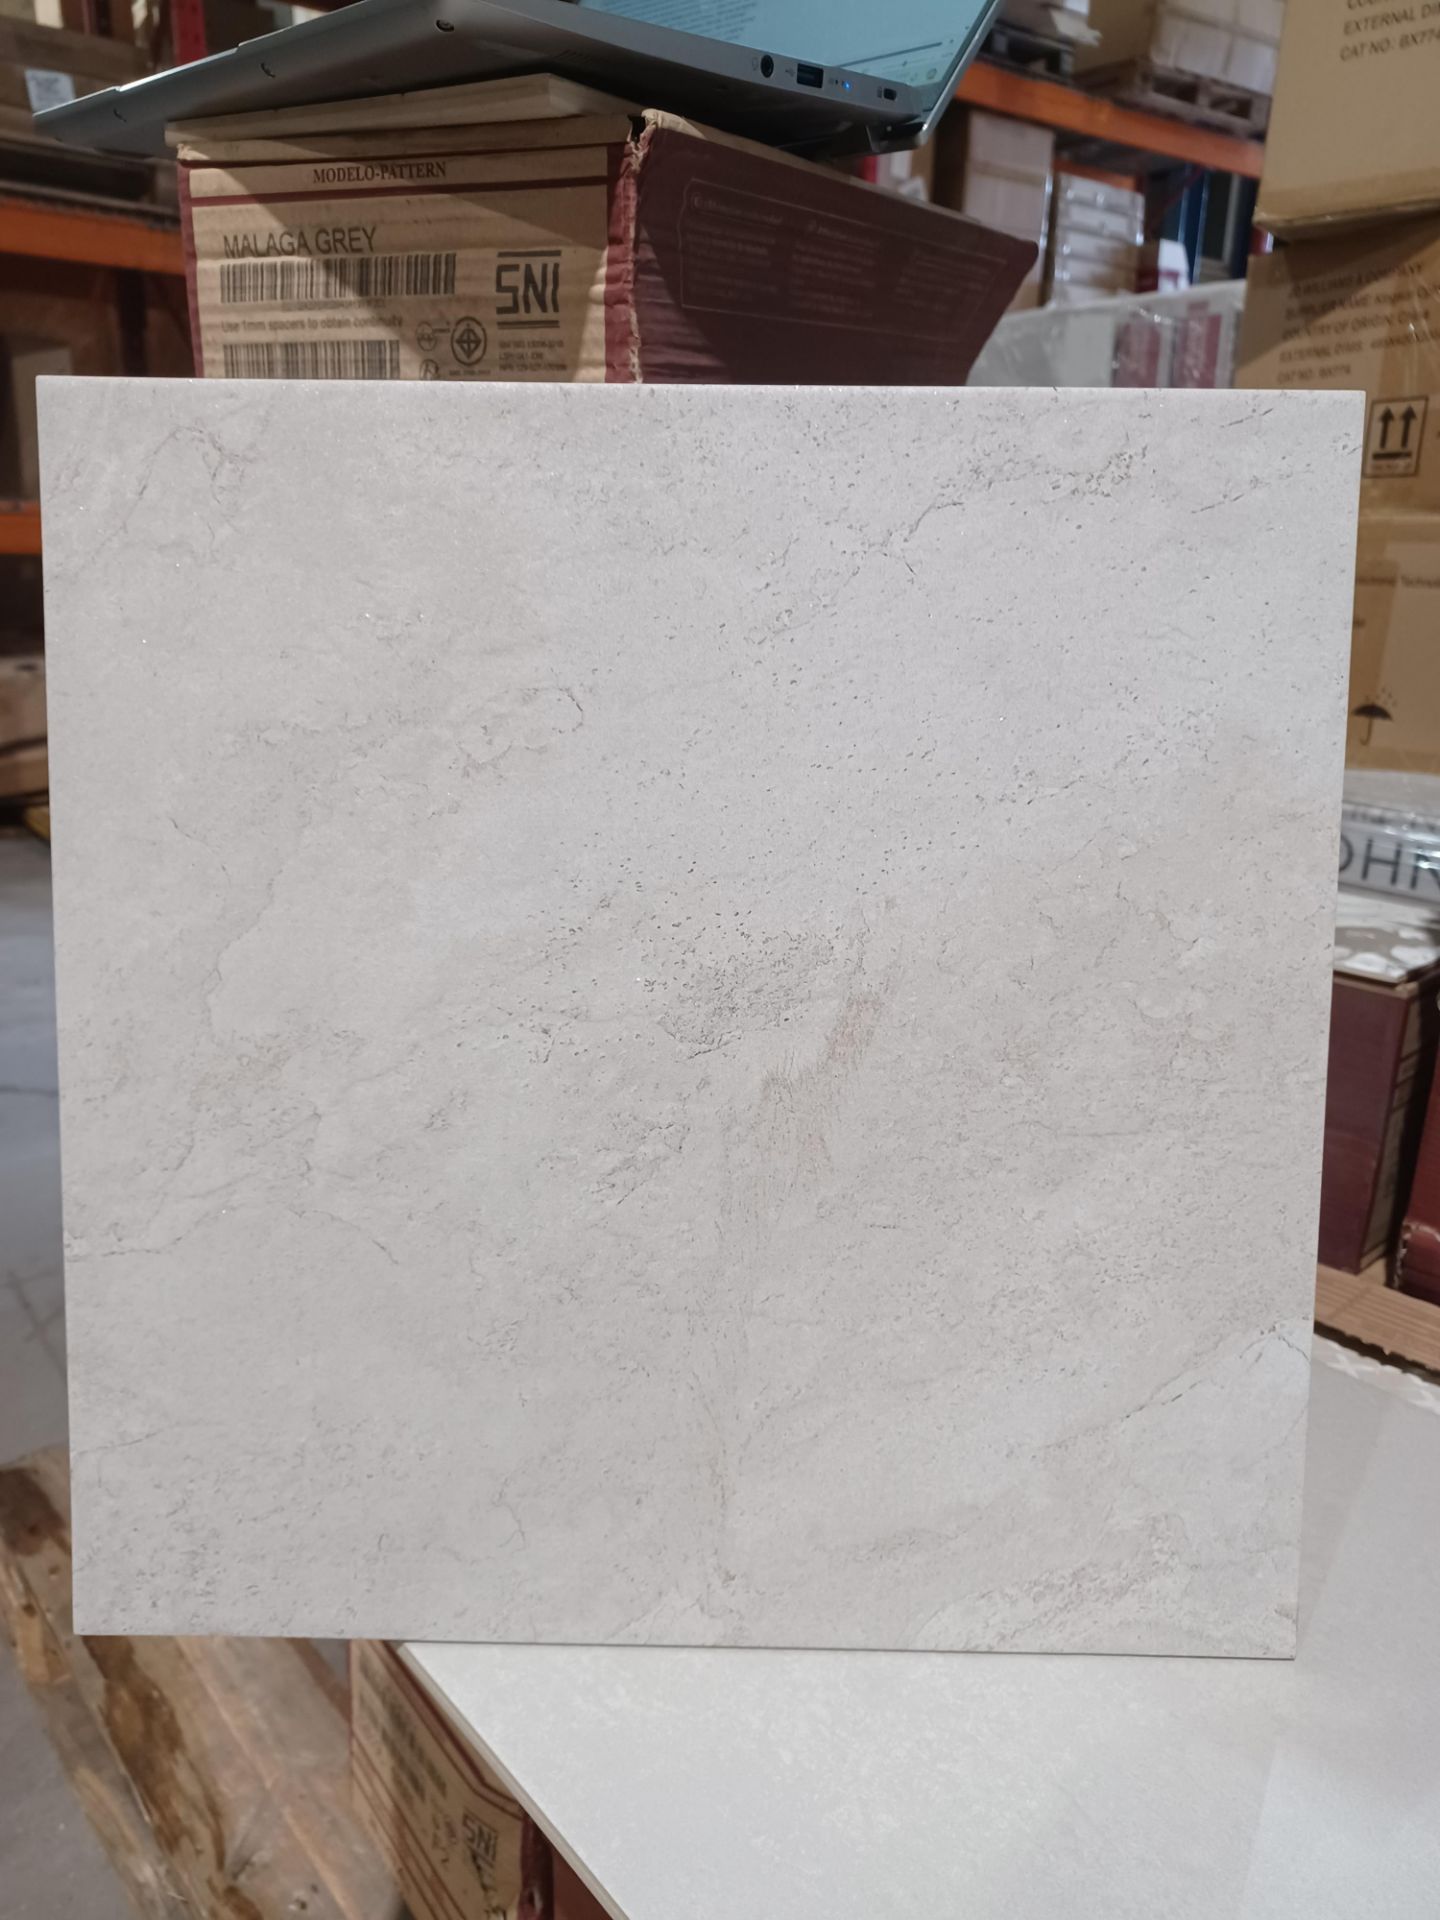 13.7 METRES SQUARED OF PORCELANOSA VENIS PROJECTS IMAGE WHITE TILES. 440x440mm. RRP £70.01 PER M2